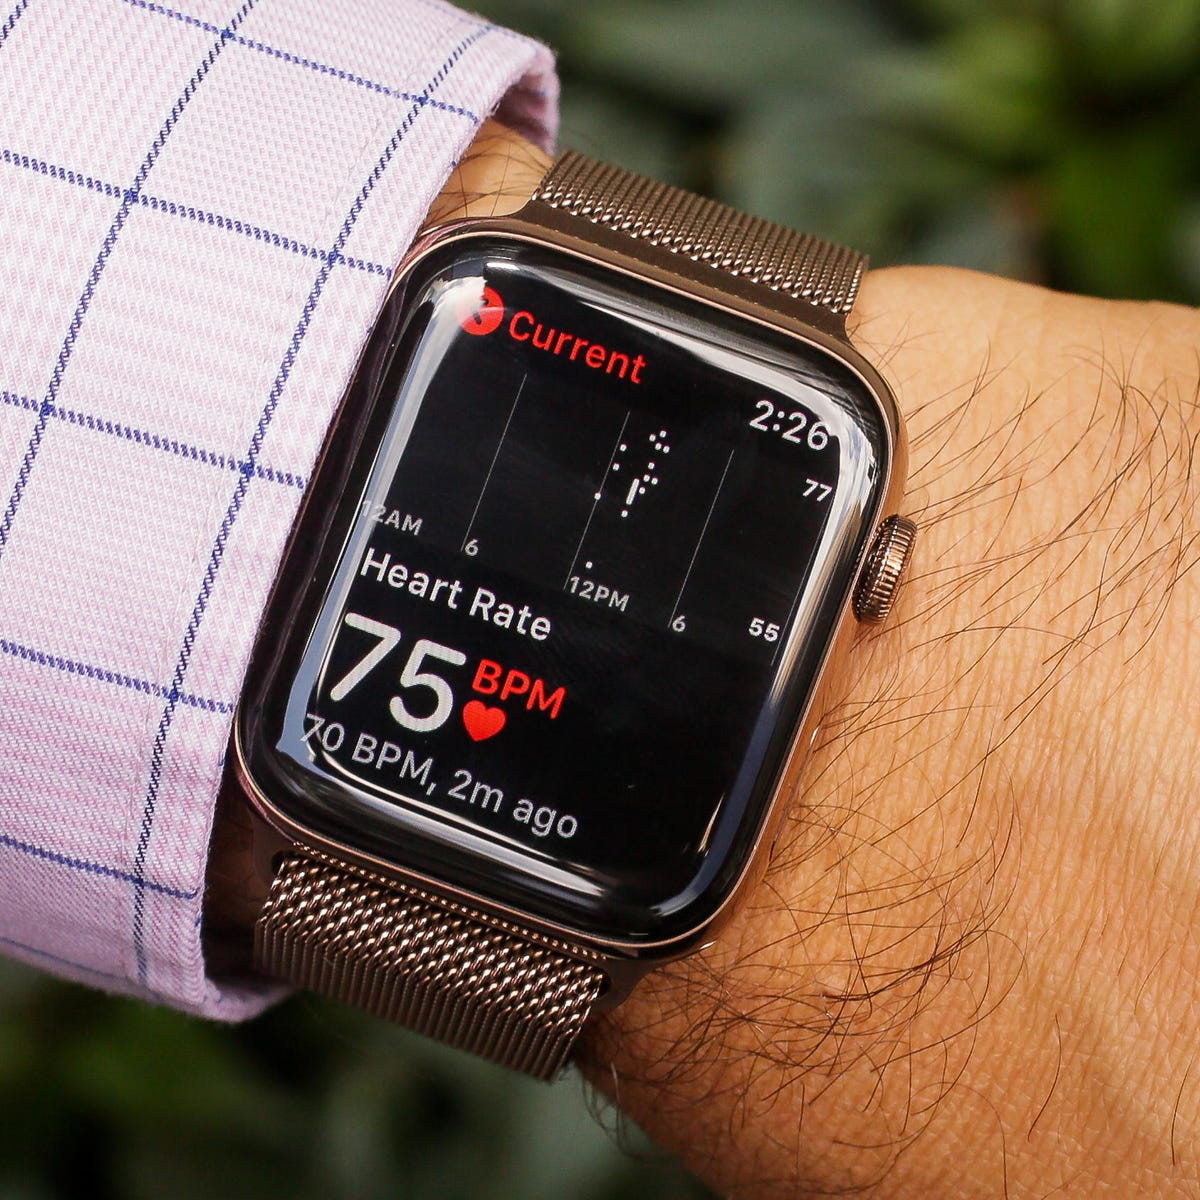 Grøn baggrund tilnærmelse Genre Is Your Heart Rate Healthy? Here's How to Find Out - CNET